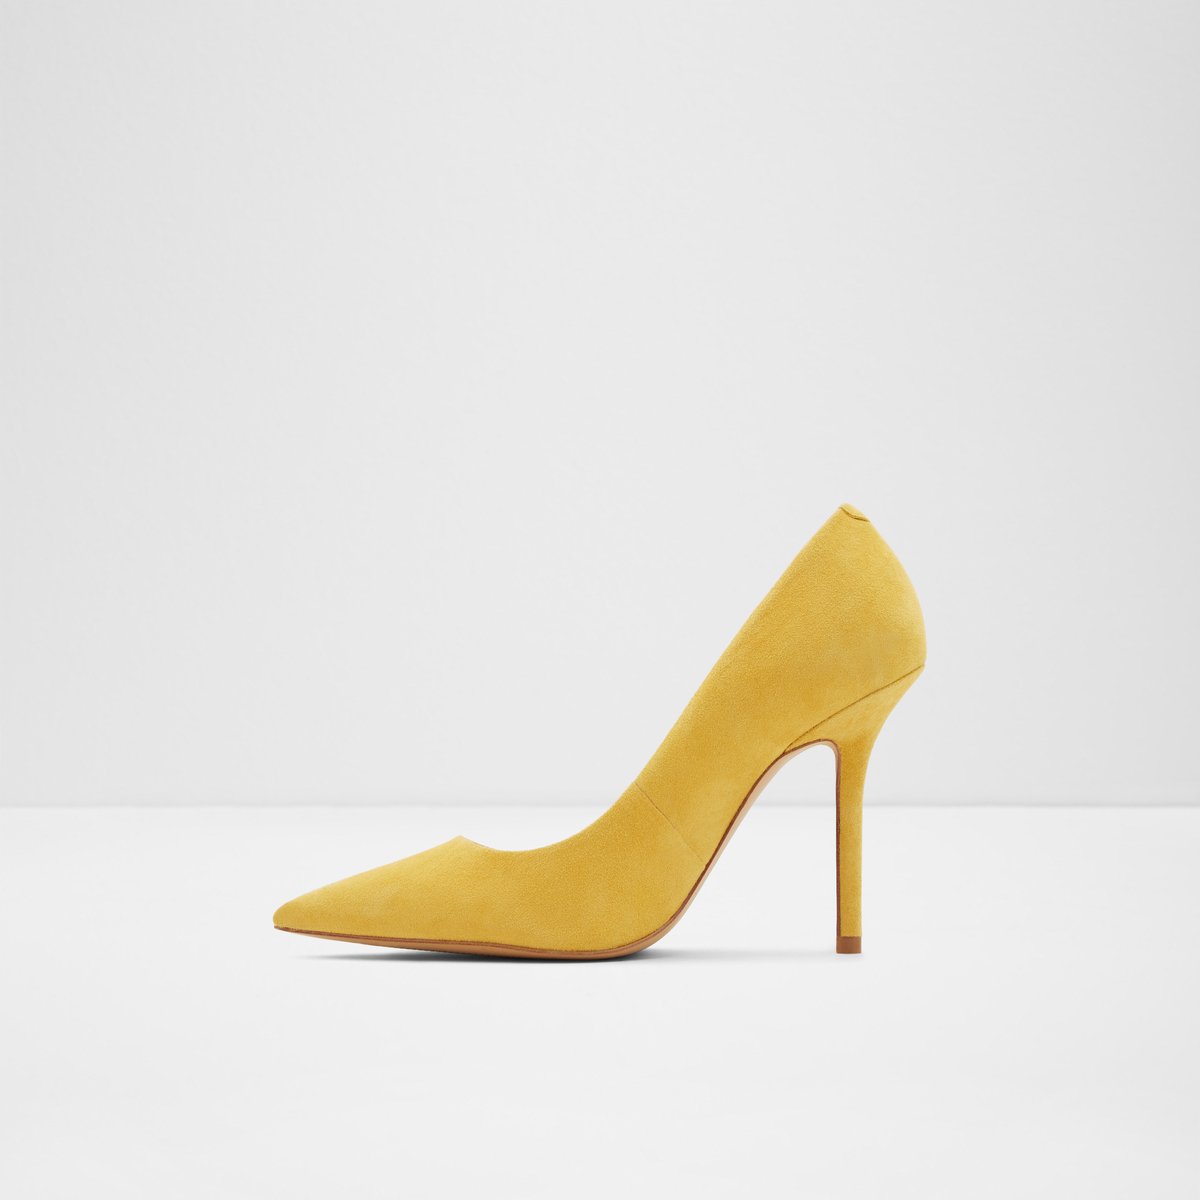 Sophy Bright Yellow Women's Court shoes 